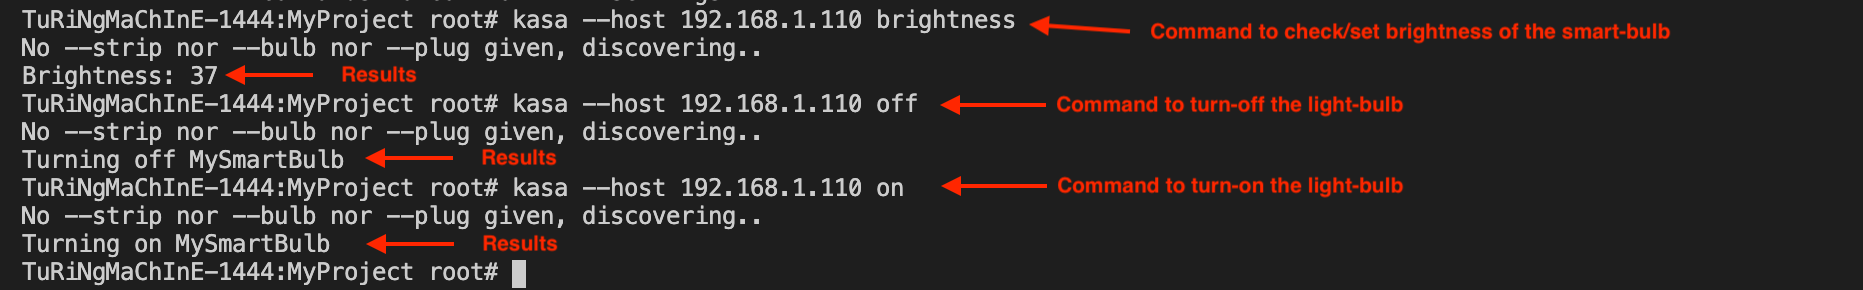 Kasa commands to control the light-bulb from a personal computer